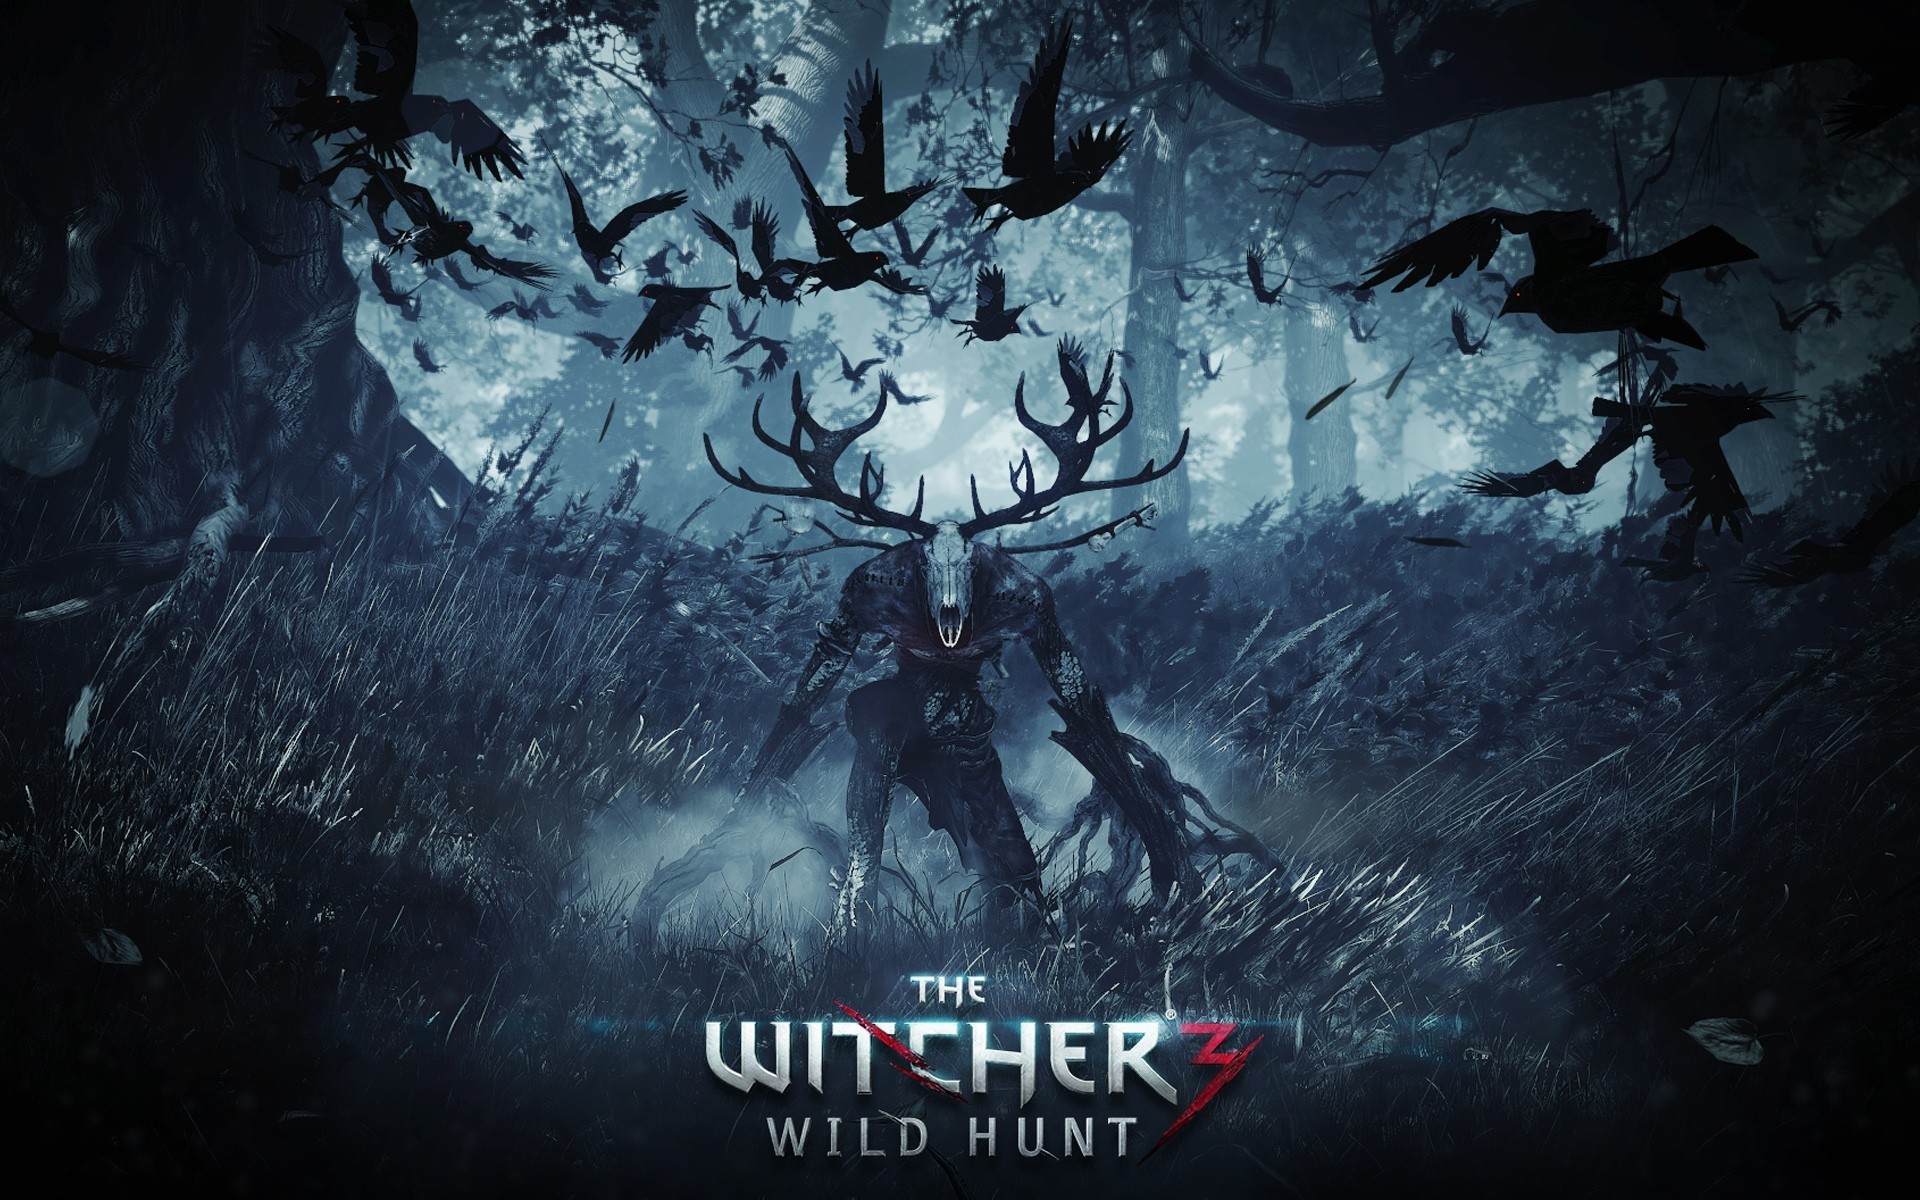 The Witcher, The Witcher 3: Wild Hunt Wallpaper